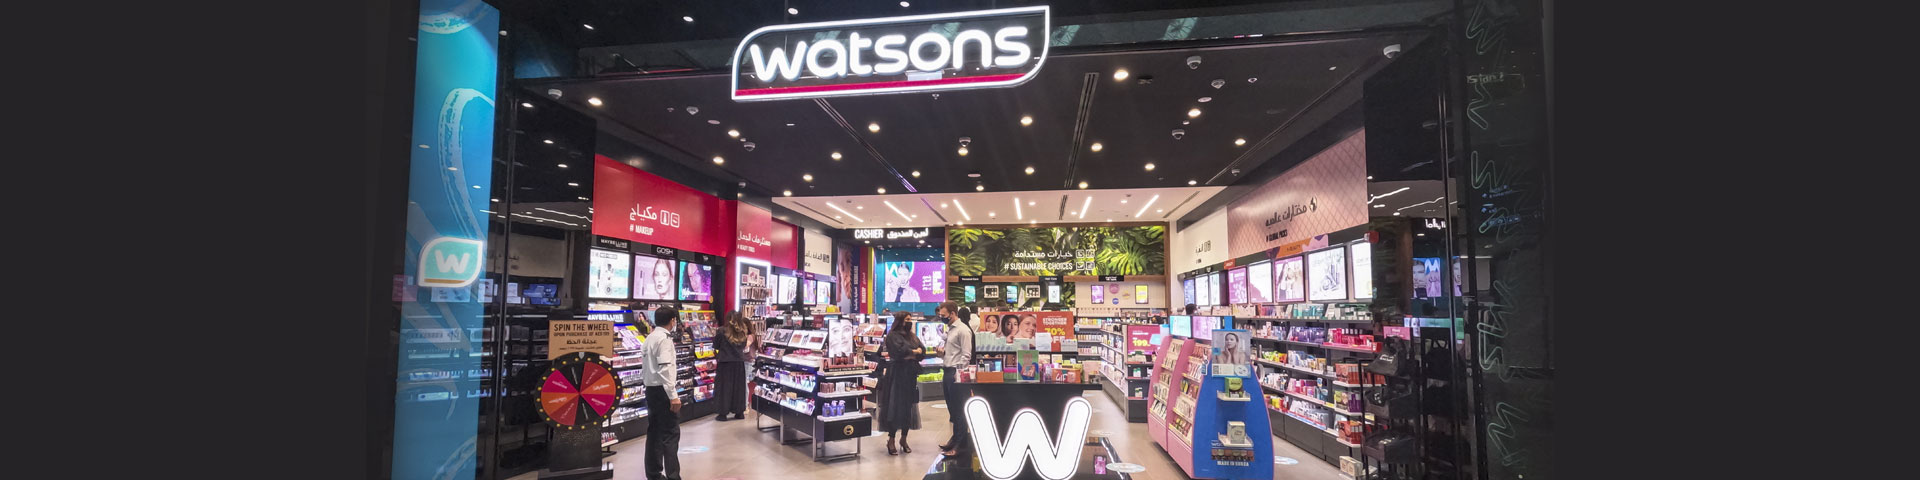 Watsons Opens its Seventh Store in the Middle East